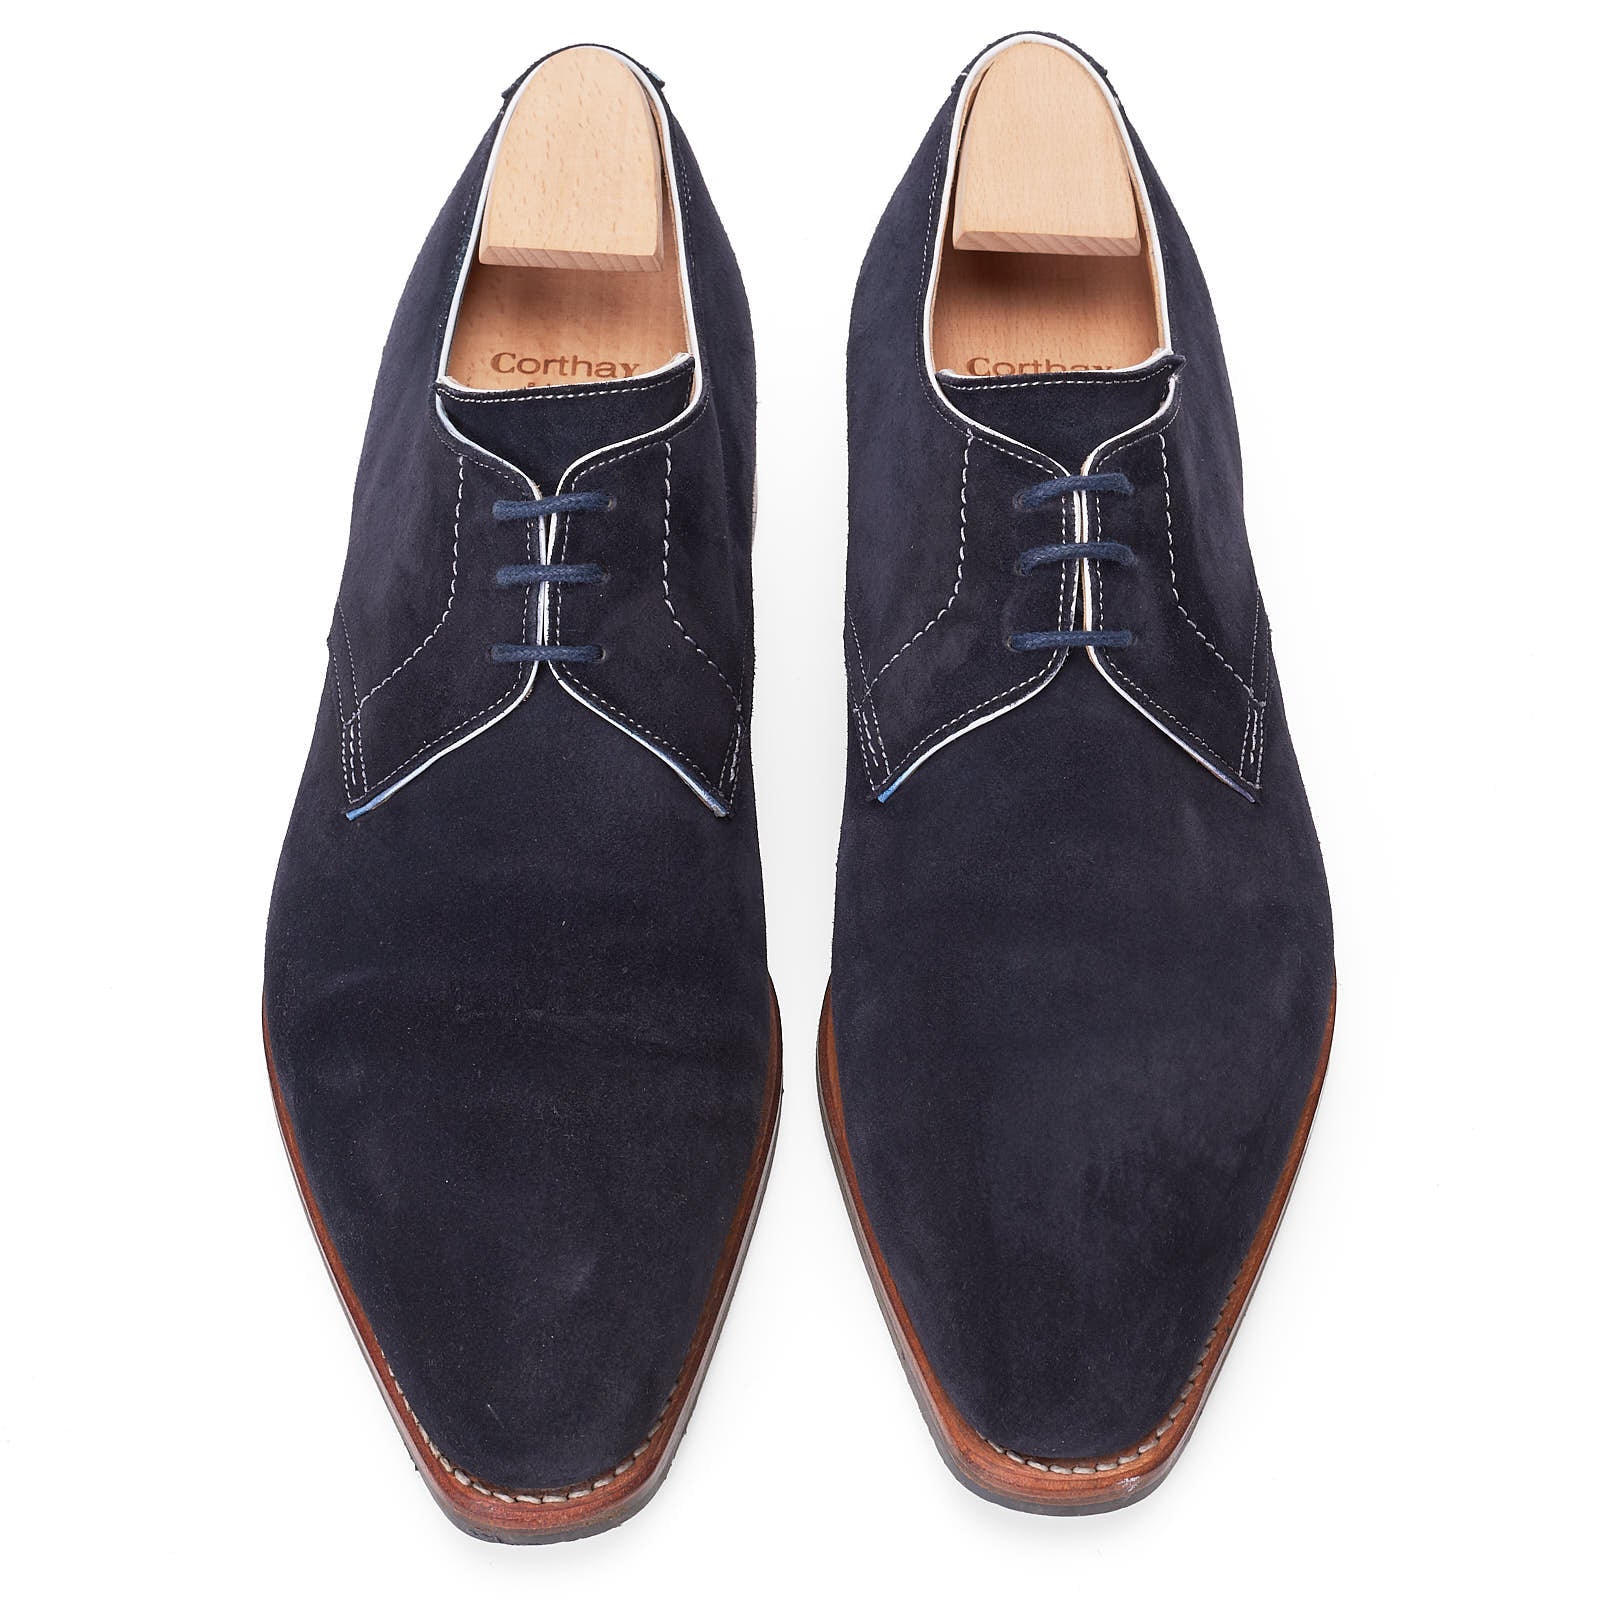 CORTHAY Paris "Sergio" Blue Suede Leather 3 Eyelet Derby Shoes Size 9